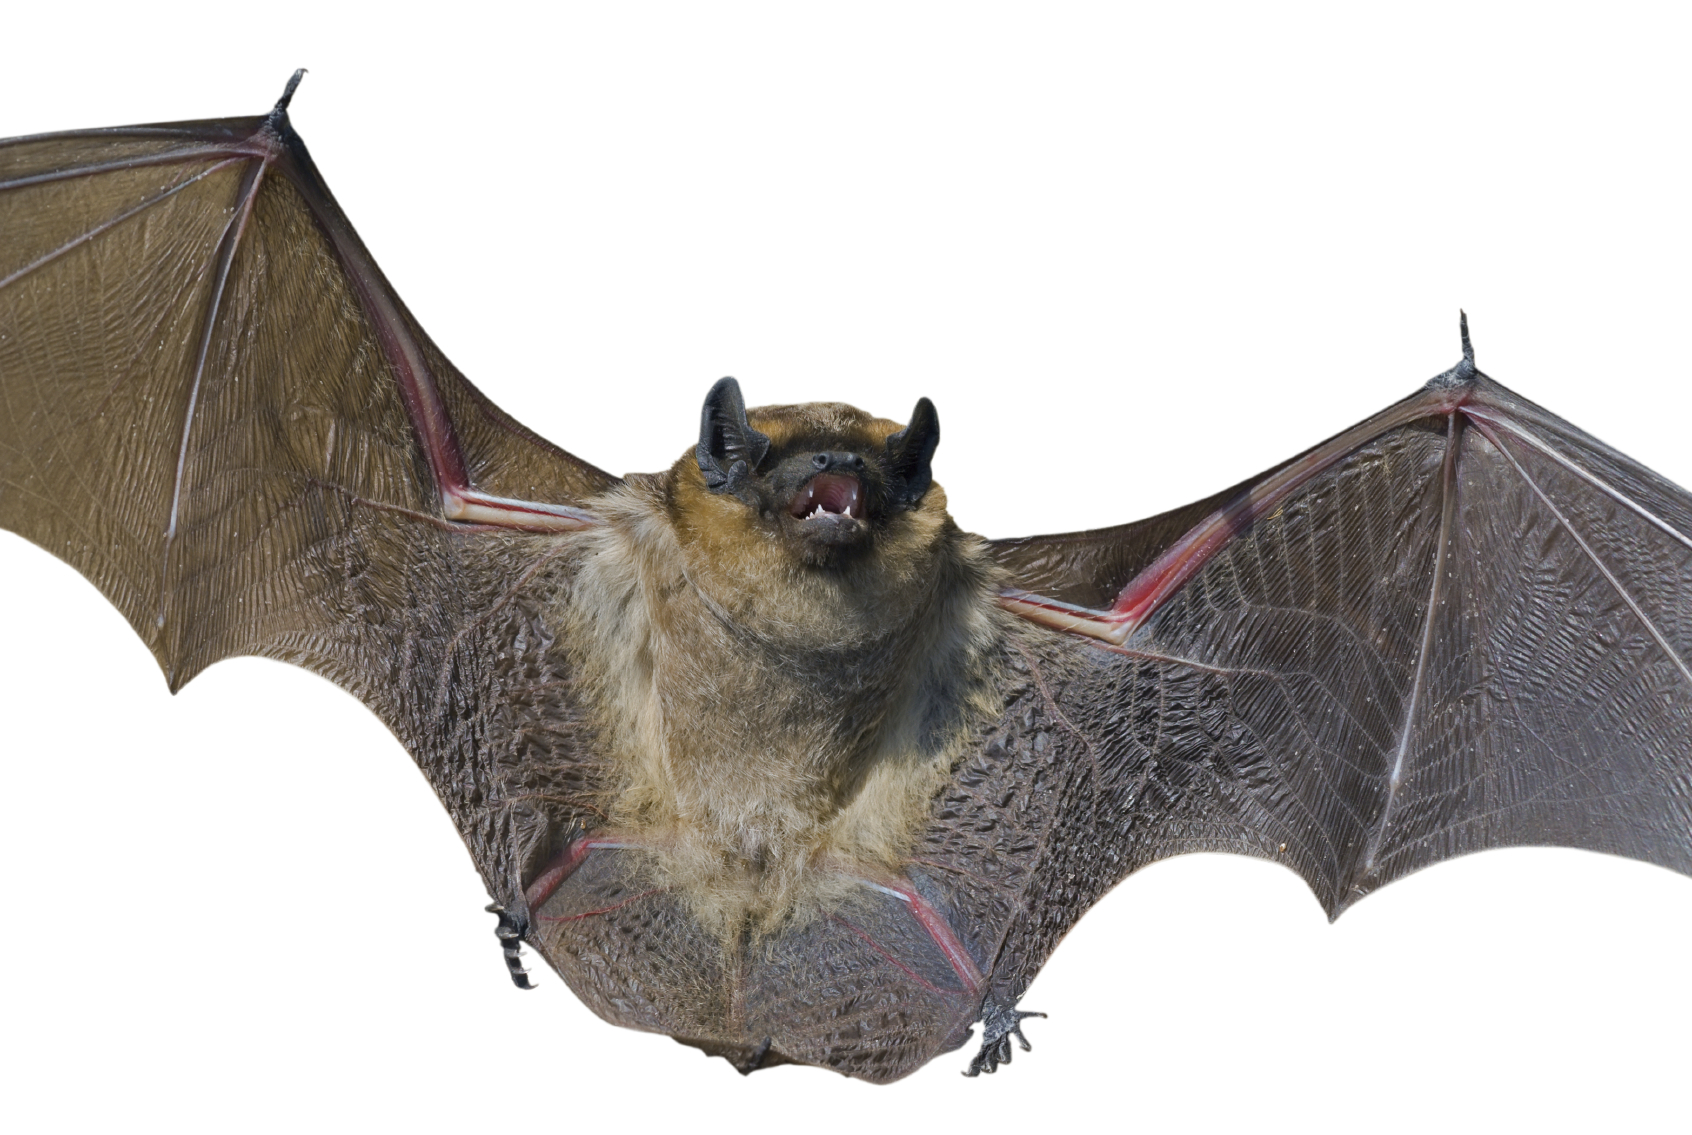 8-need-rabies-shots-after-child-brings-bat-to-school-in-montana-cbs-news